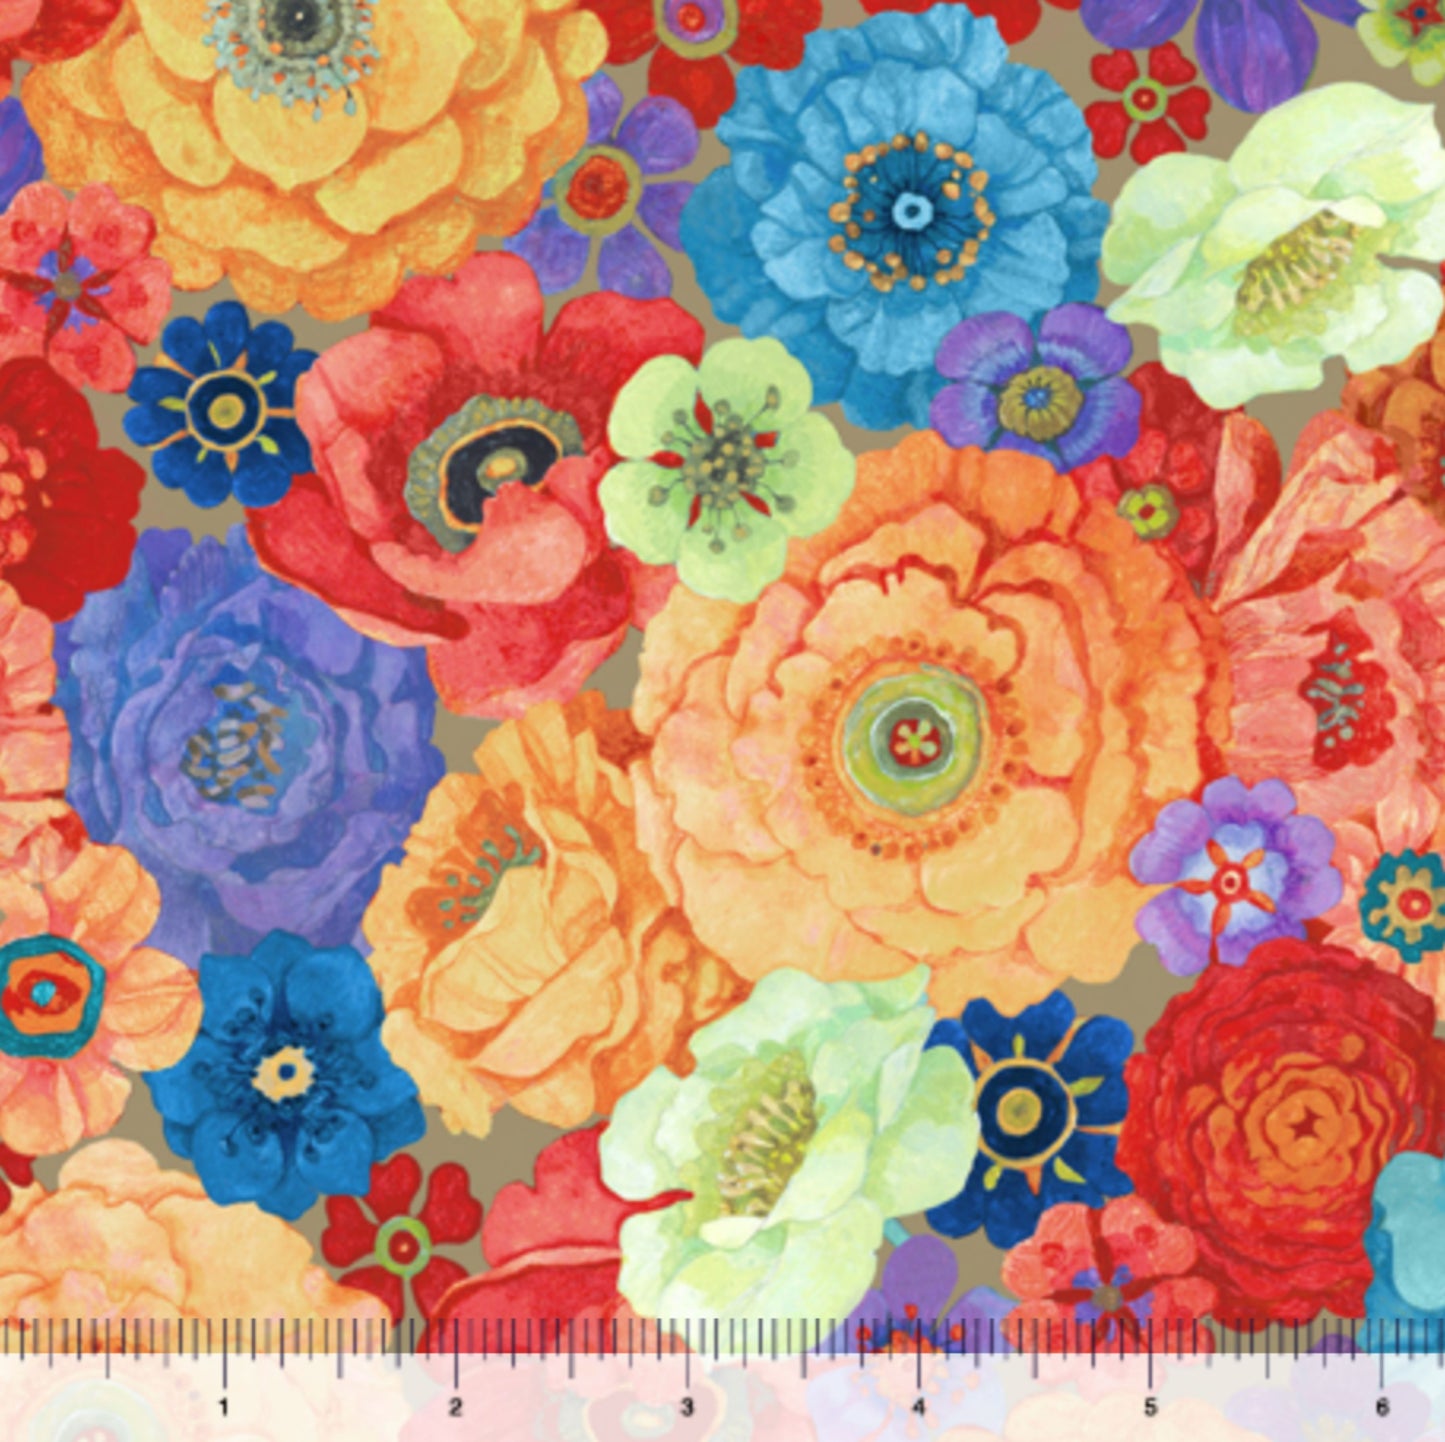 Fabric By The Yard - Clustered Floral - Peacock Blossoms - 29158-00 QT Fabrics